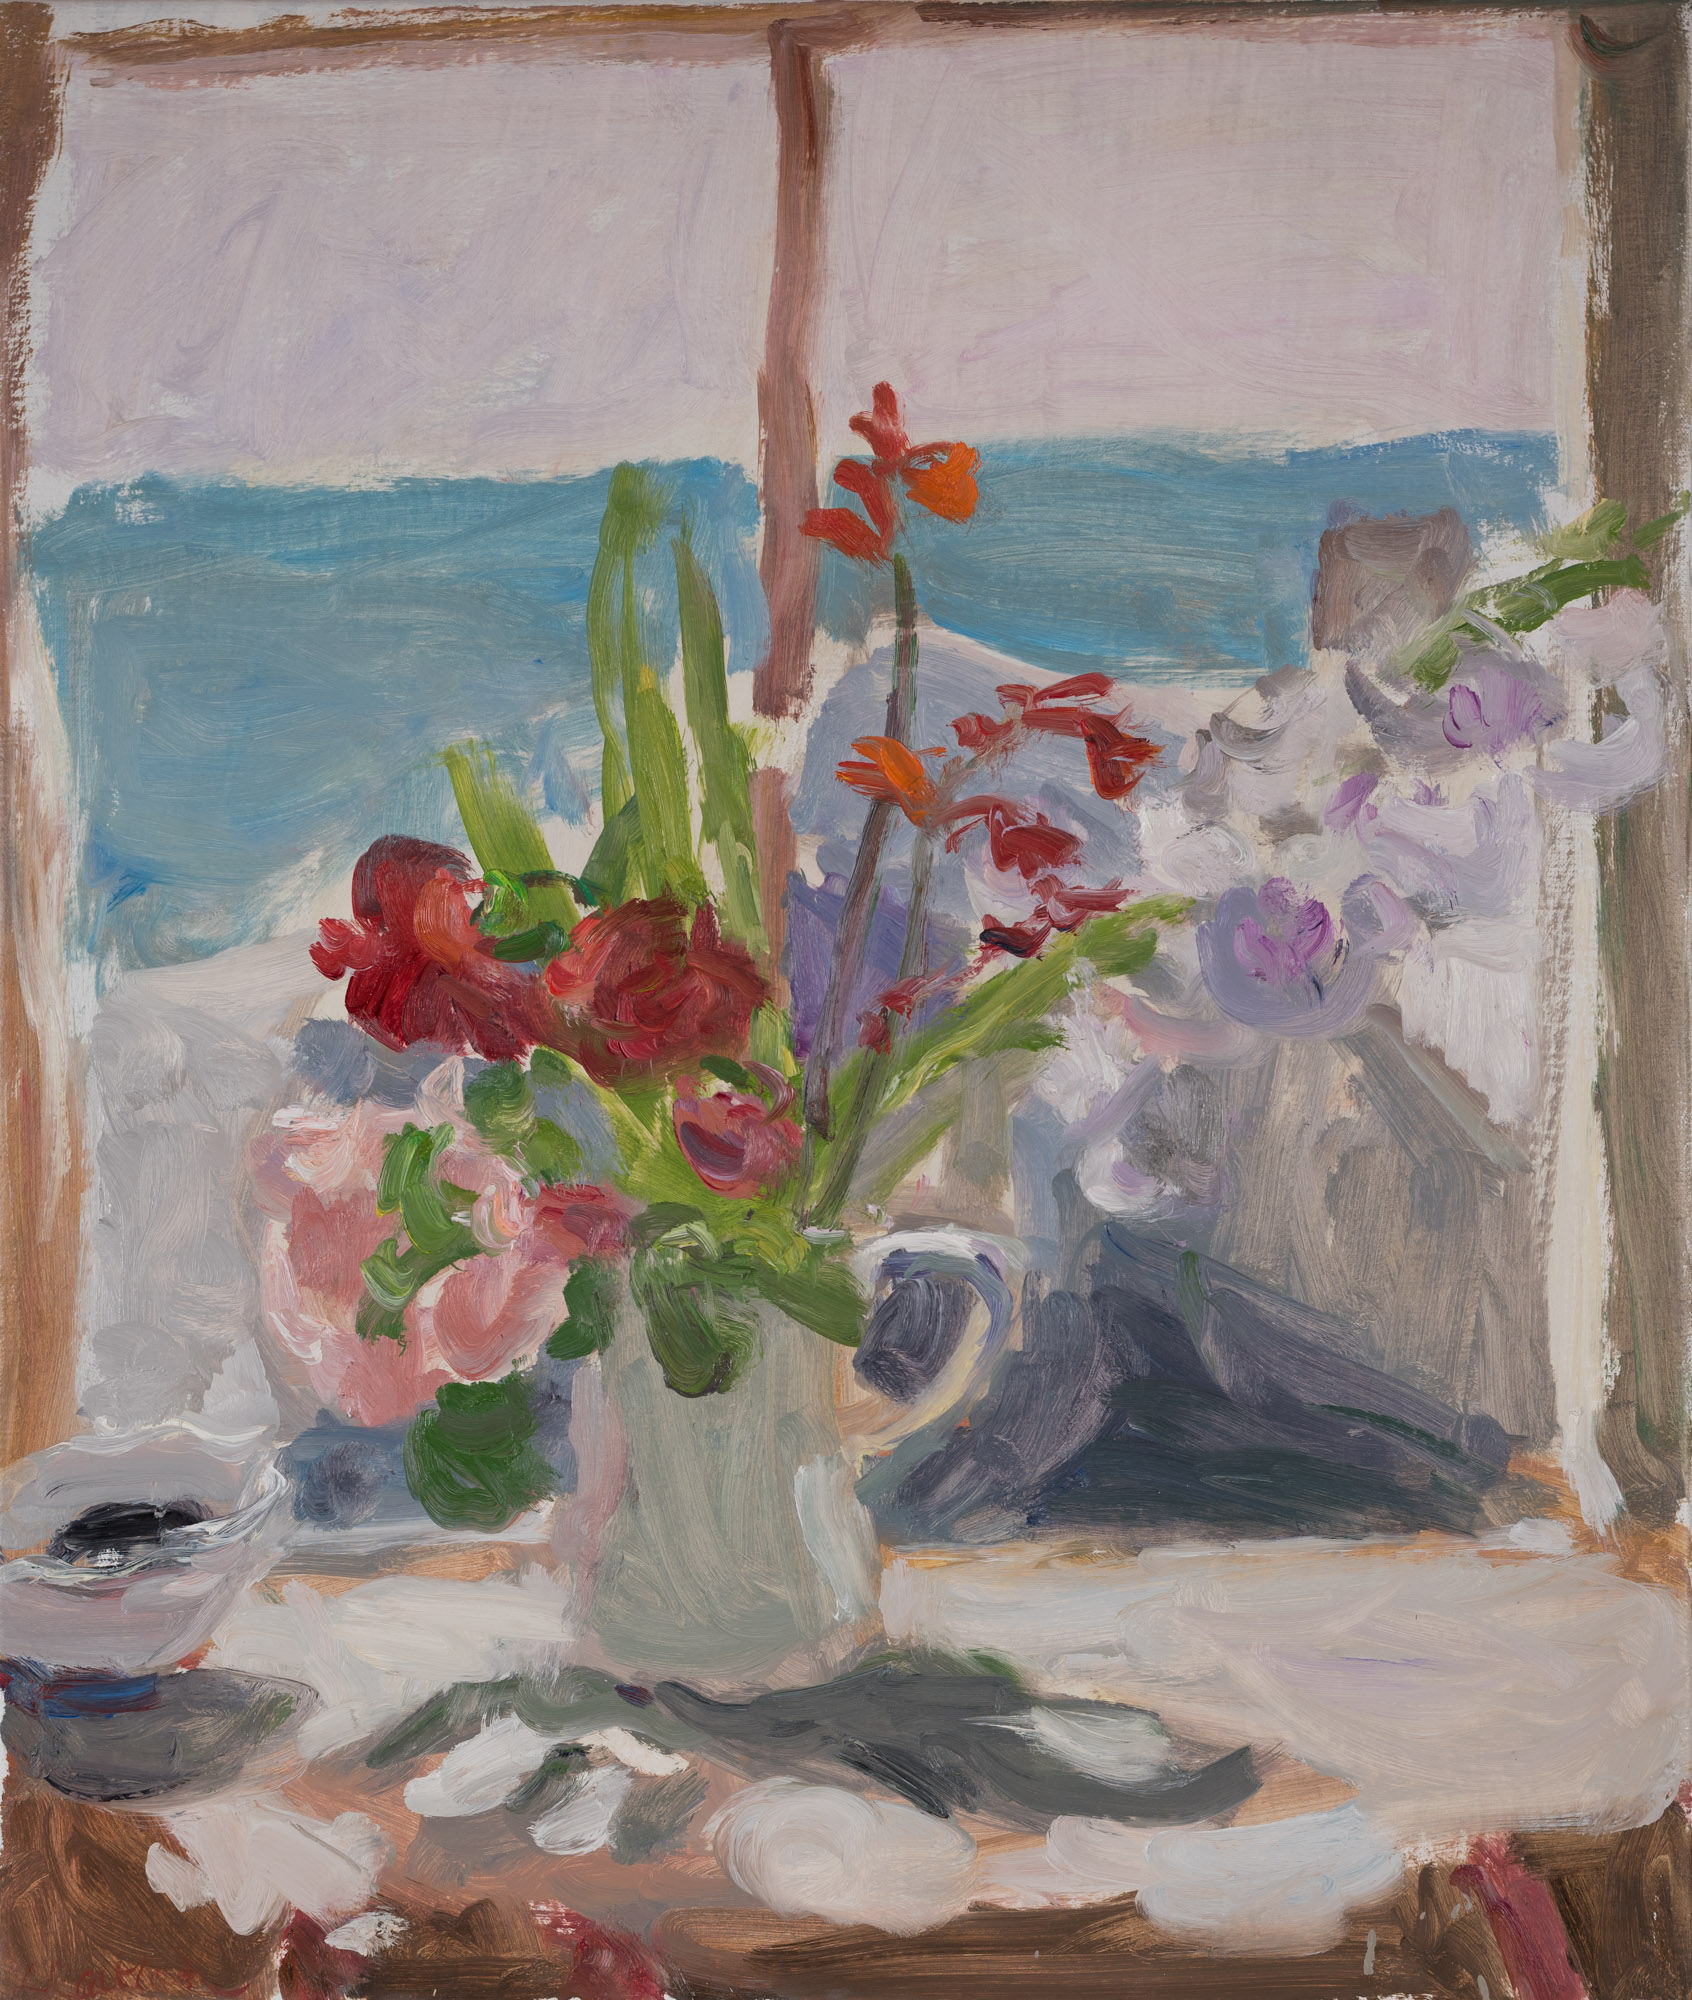 Sea View and Summer Flowers